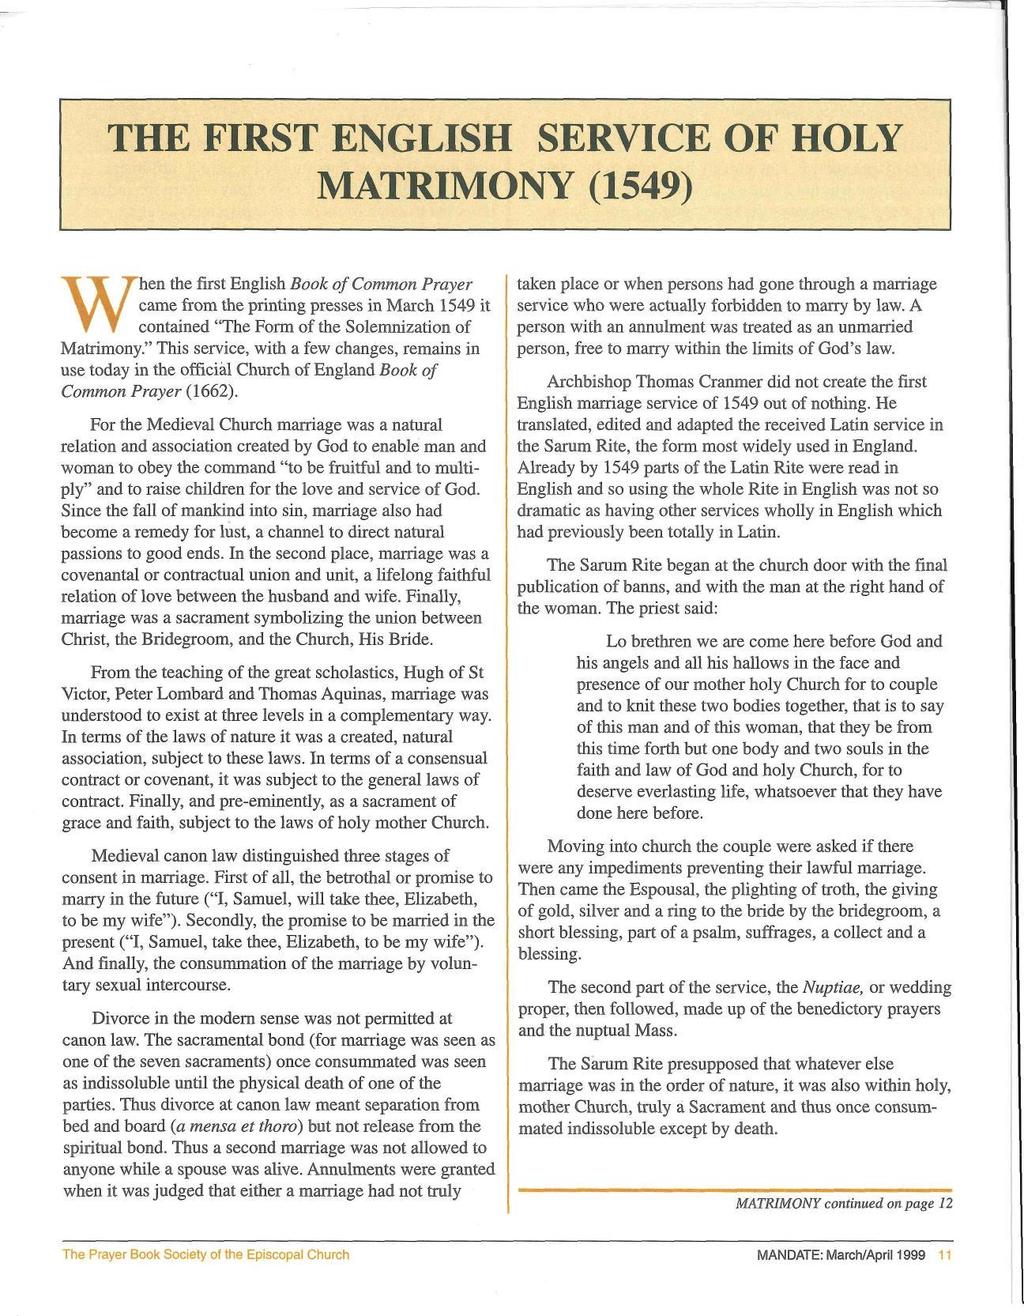 THE FIRST ENGLISH SERVICE OF HOLY MATRIMONY (1549) When the first English Book of Common Prayer came from the printing presses in March 1549 it contained "The Form of the Solemnization of Matrimony.